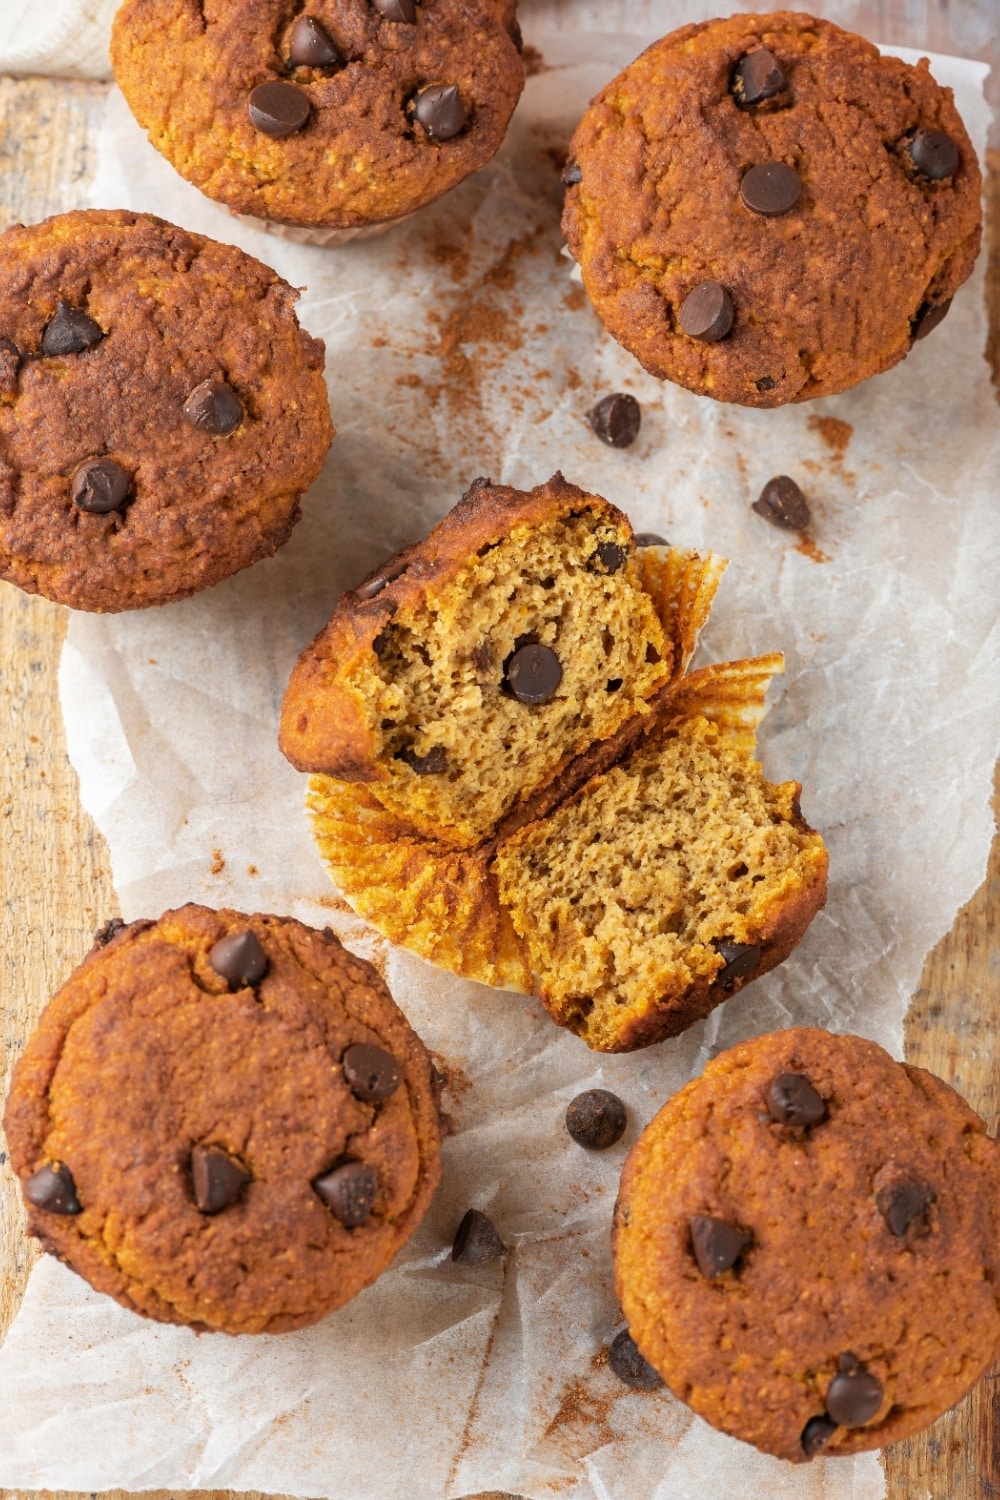 Five chocolate chip pumpkin muffins surrounding one pumpkin muffin that is broken in half with the inside facing up. The muffins are on a piece of parchment paper on wood.